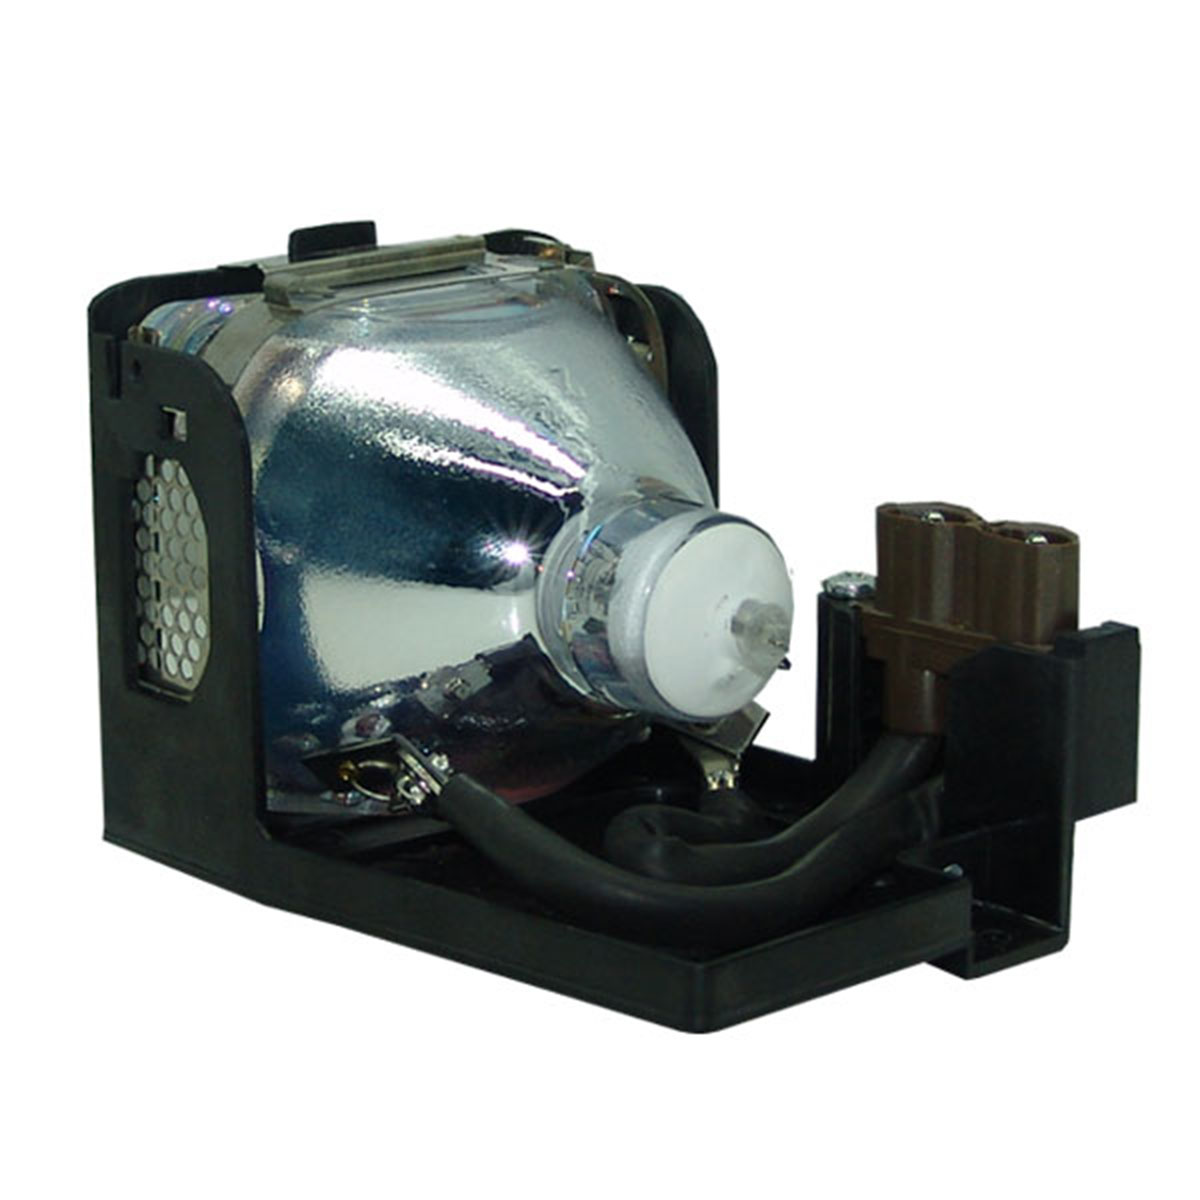 Lutema Economy Bulb for Eiki 610-300-7267 Projector (Lamp with Housing) - image 5 of 6